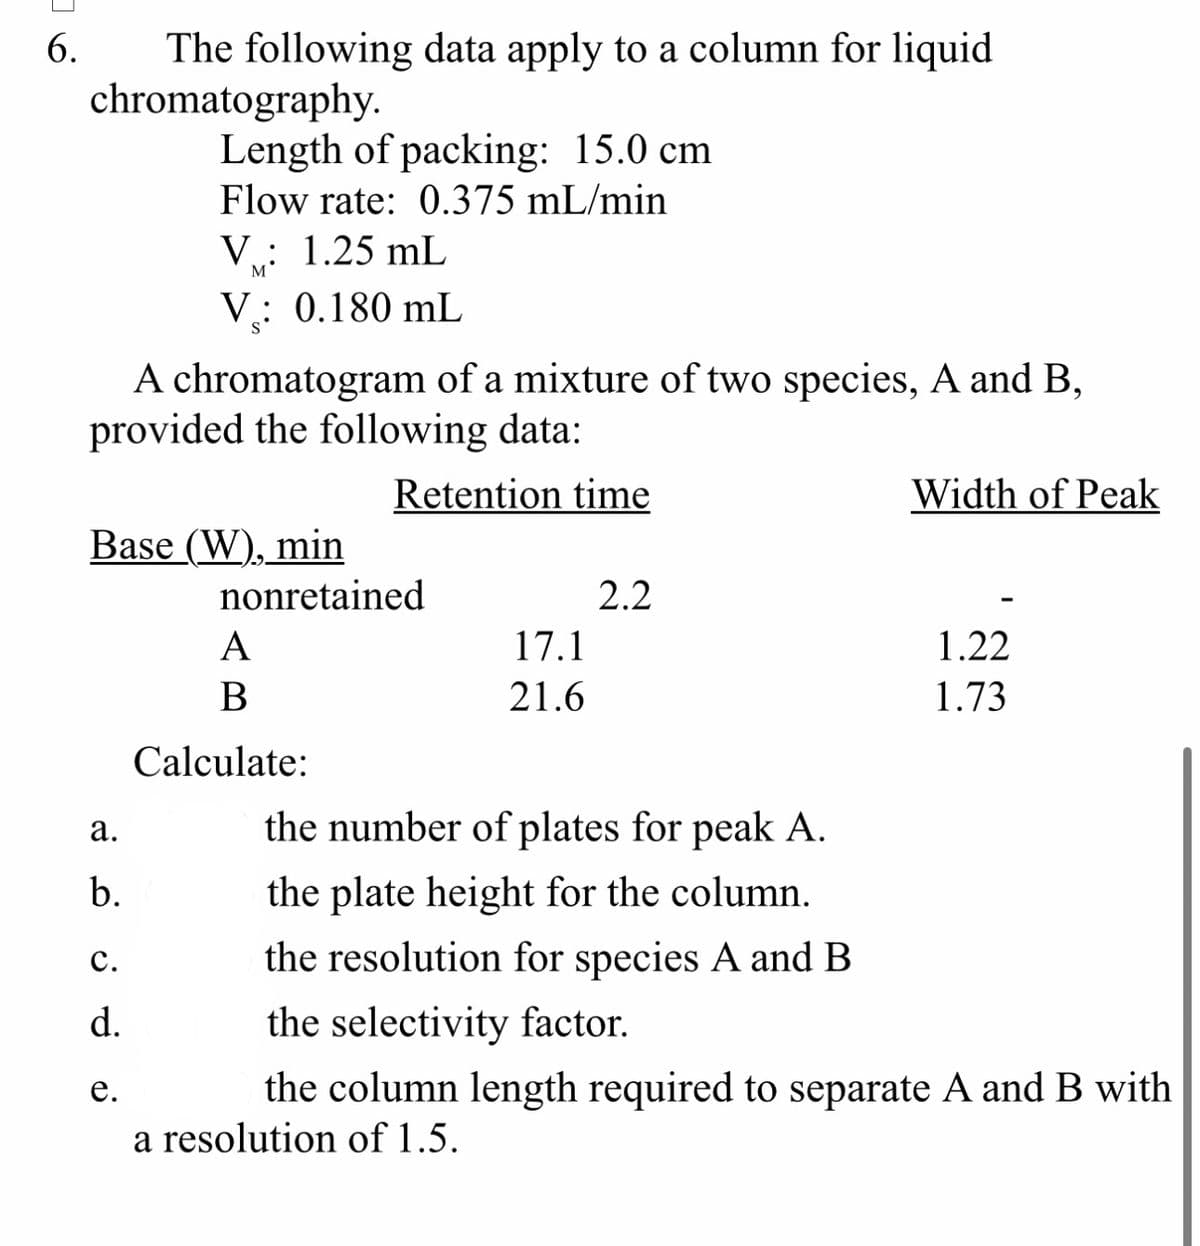 6.
The following data apply to a column for liquid
chromatography.
A chromatogram of a mixture of two species, A and B,
provided the following data:
Retention time
a.
b.
Length of packing: 15.0 cm
Flow rate: 0.375 mL/min
Base (W), min
C.
d.
V: 1.25 mL
M
V: 0.180 mL
e.
nonretained
A
B
Calculate:
17.1
21.6
a resolution of 1.5.
2.2
Width of Peak
1.22
1.73
the number of plates for peak A.
the plate height for the column.
the resolution for species A and B
the selectivity factor.
the column length required to separate A and B with